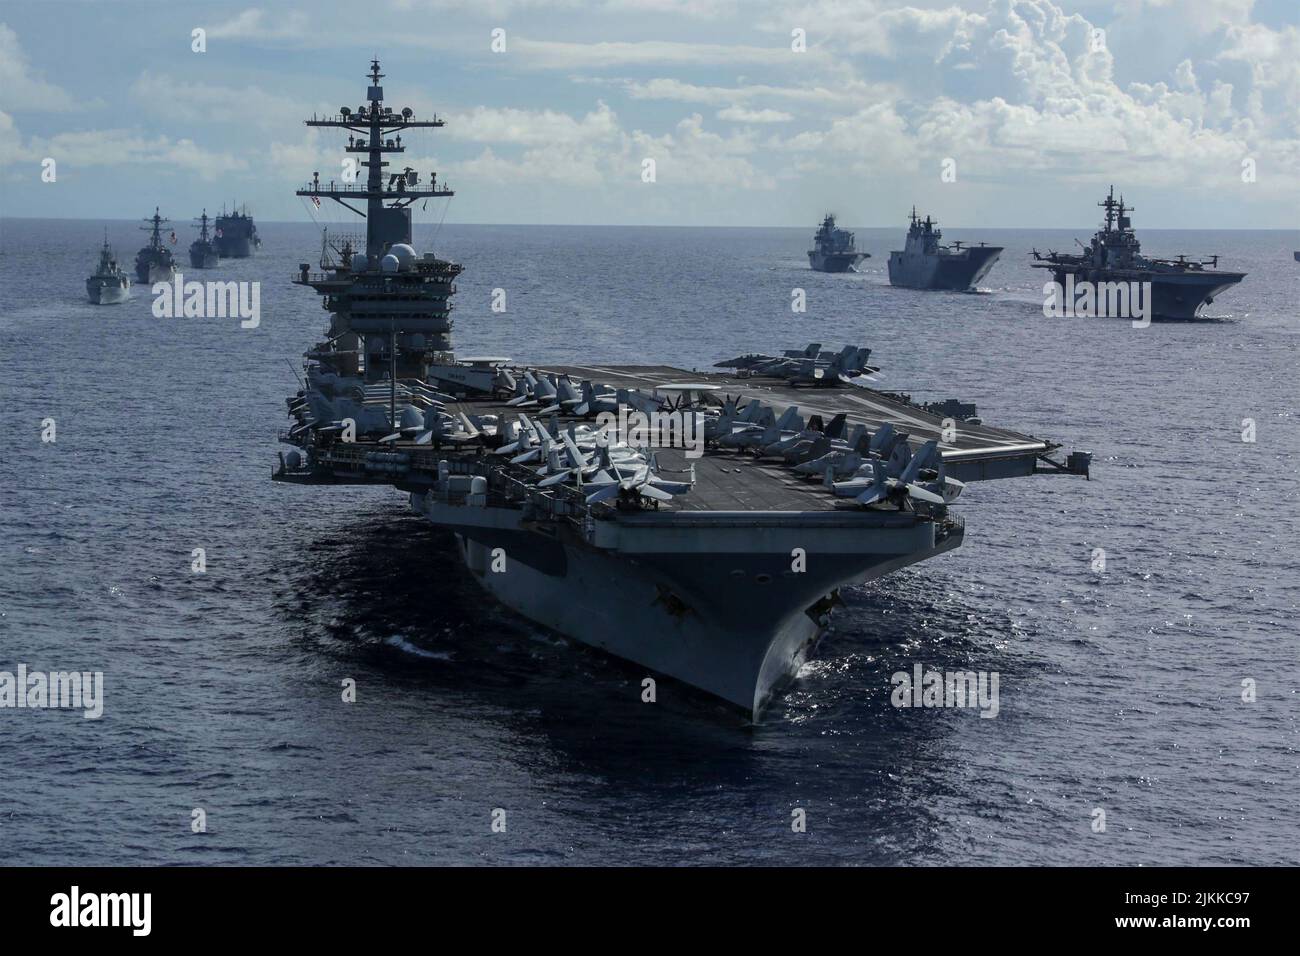 Pacific Ocean, United States. 28 July, 2022. The U.S. Navy Nimitz-class aircraft carrier USS Abraham Lincoln sails in formation with ships from Twenty-six nations during Rim of the Pacific in the Pacific Ocean, July 28, 2022 near Hawaii, USA.  Credit: MC3 Aleksandr Freutel/Planetpix/Alamy Live News Stock Photo